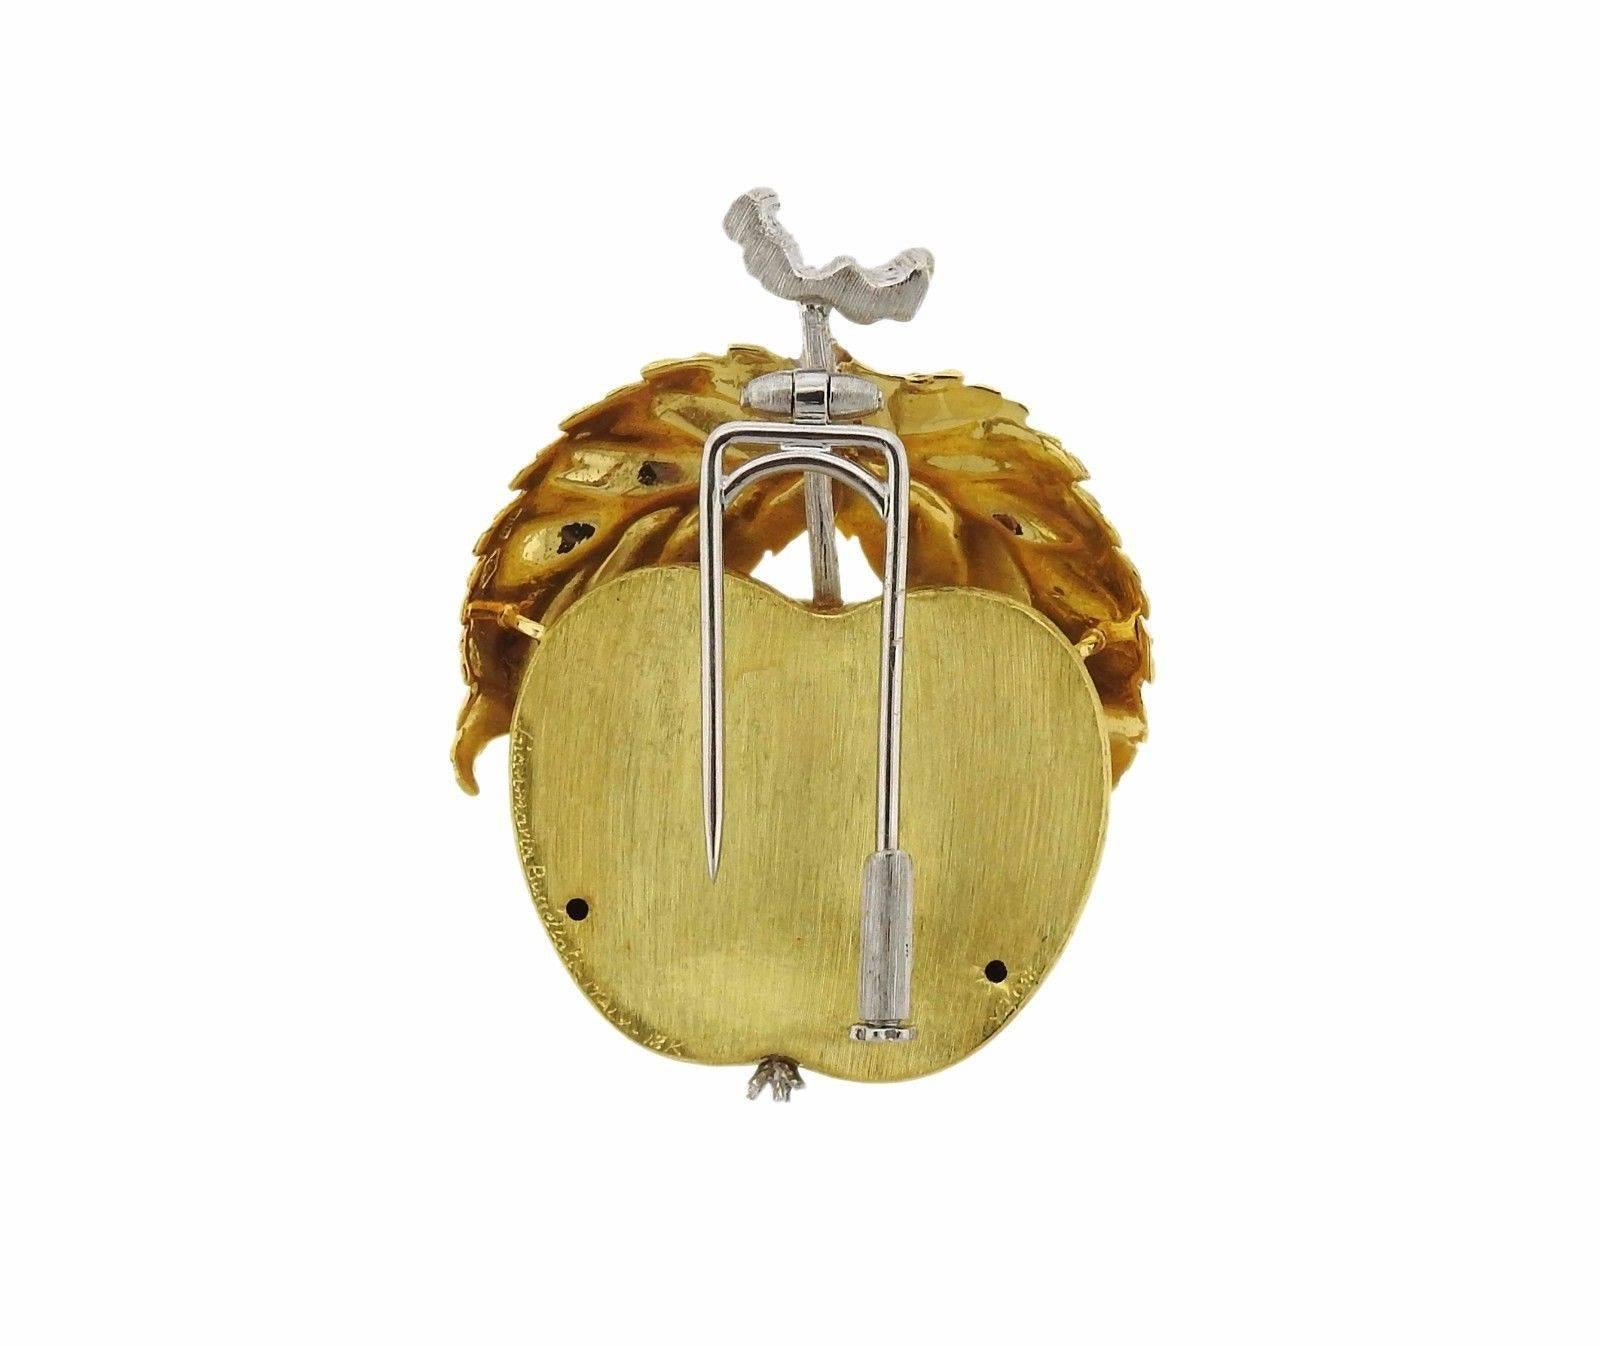 An 18k gold brooch depicting an apple.  The brooch measures 41mm x 32mm and weighs 21.9 grams.  Marked: Buccellati, 18k, Italy.  Comes with Buccellati paperwork.  Retail is $11920.